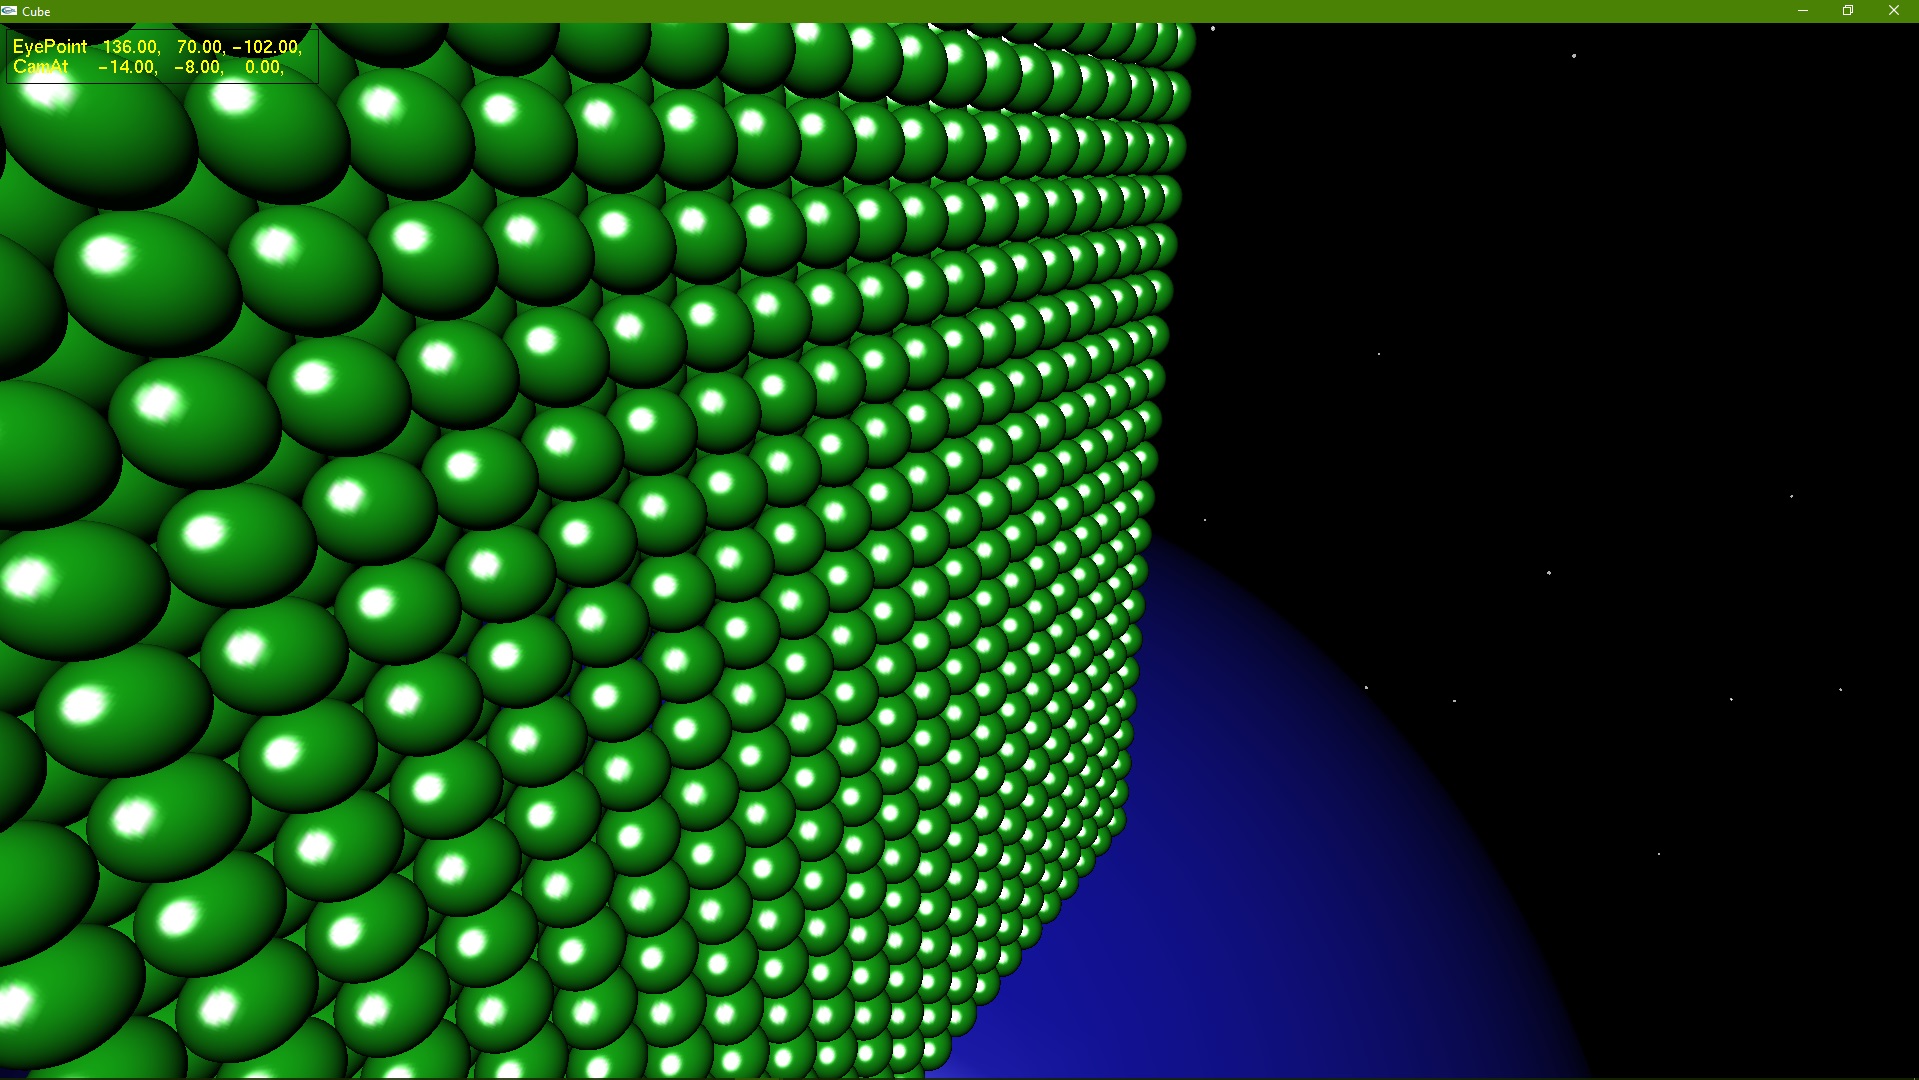 Array of Balls in Spcae